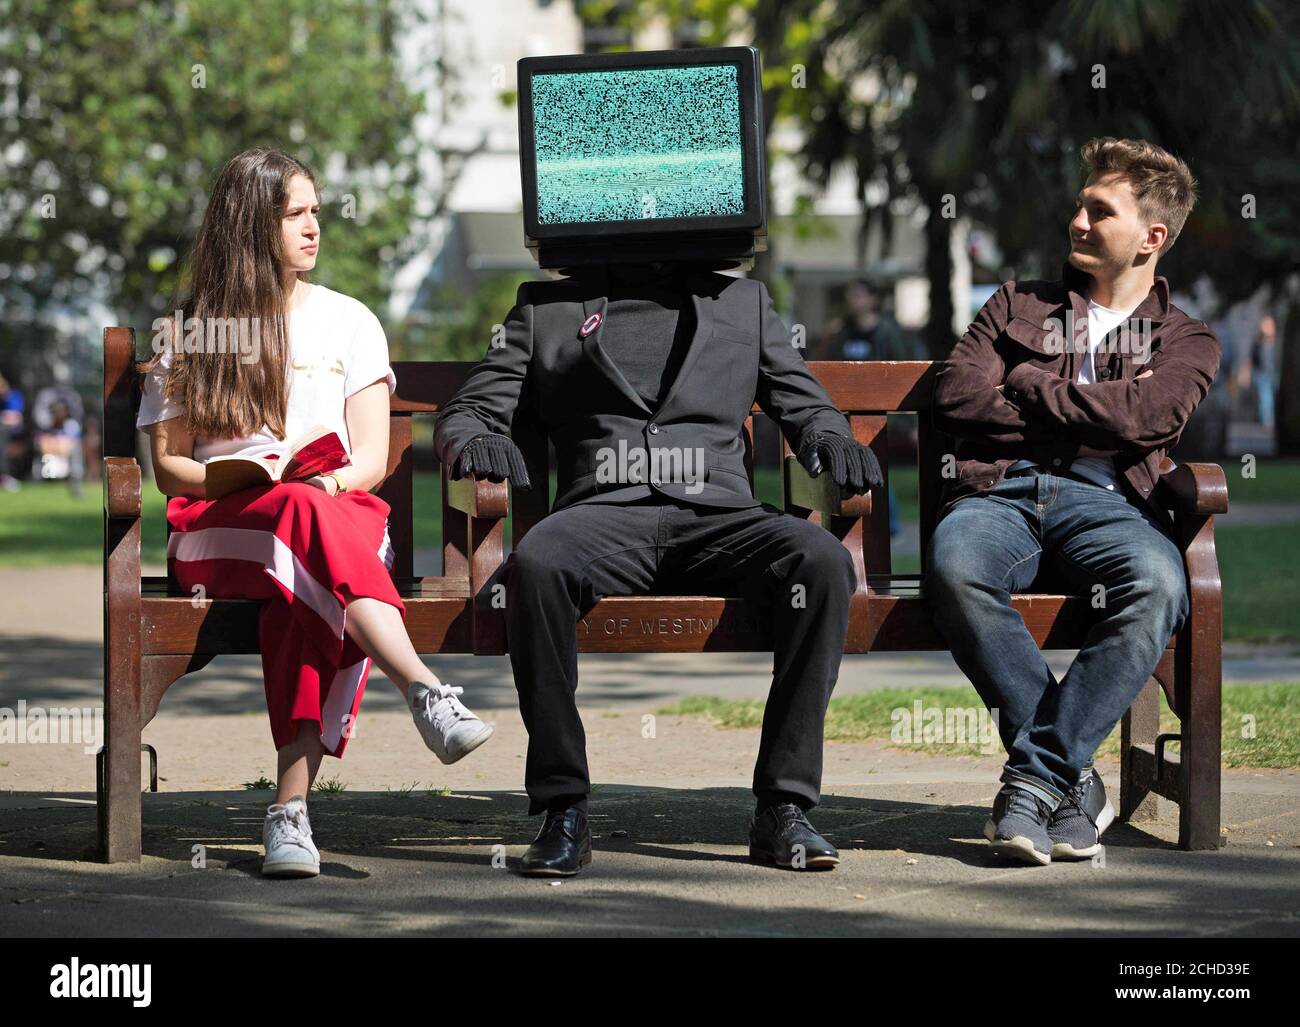 Embargoed to 0001 Thursday May 24 EDITORIAL USE ONLY  A person with a TV head in Soho Square, London, as part of a campaign by Samsung to launch their new QLED TV range. Stock Photo